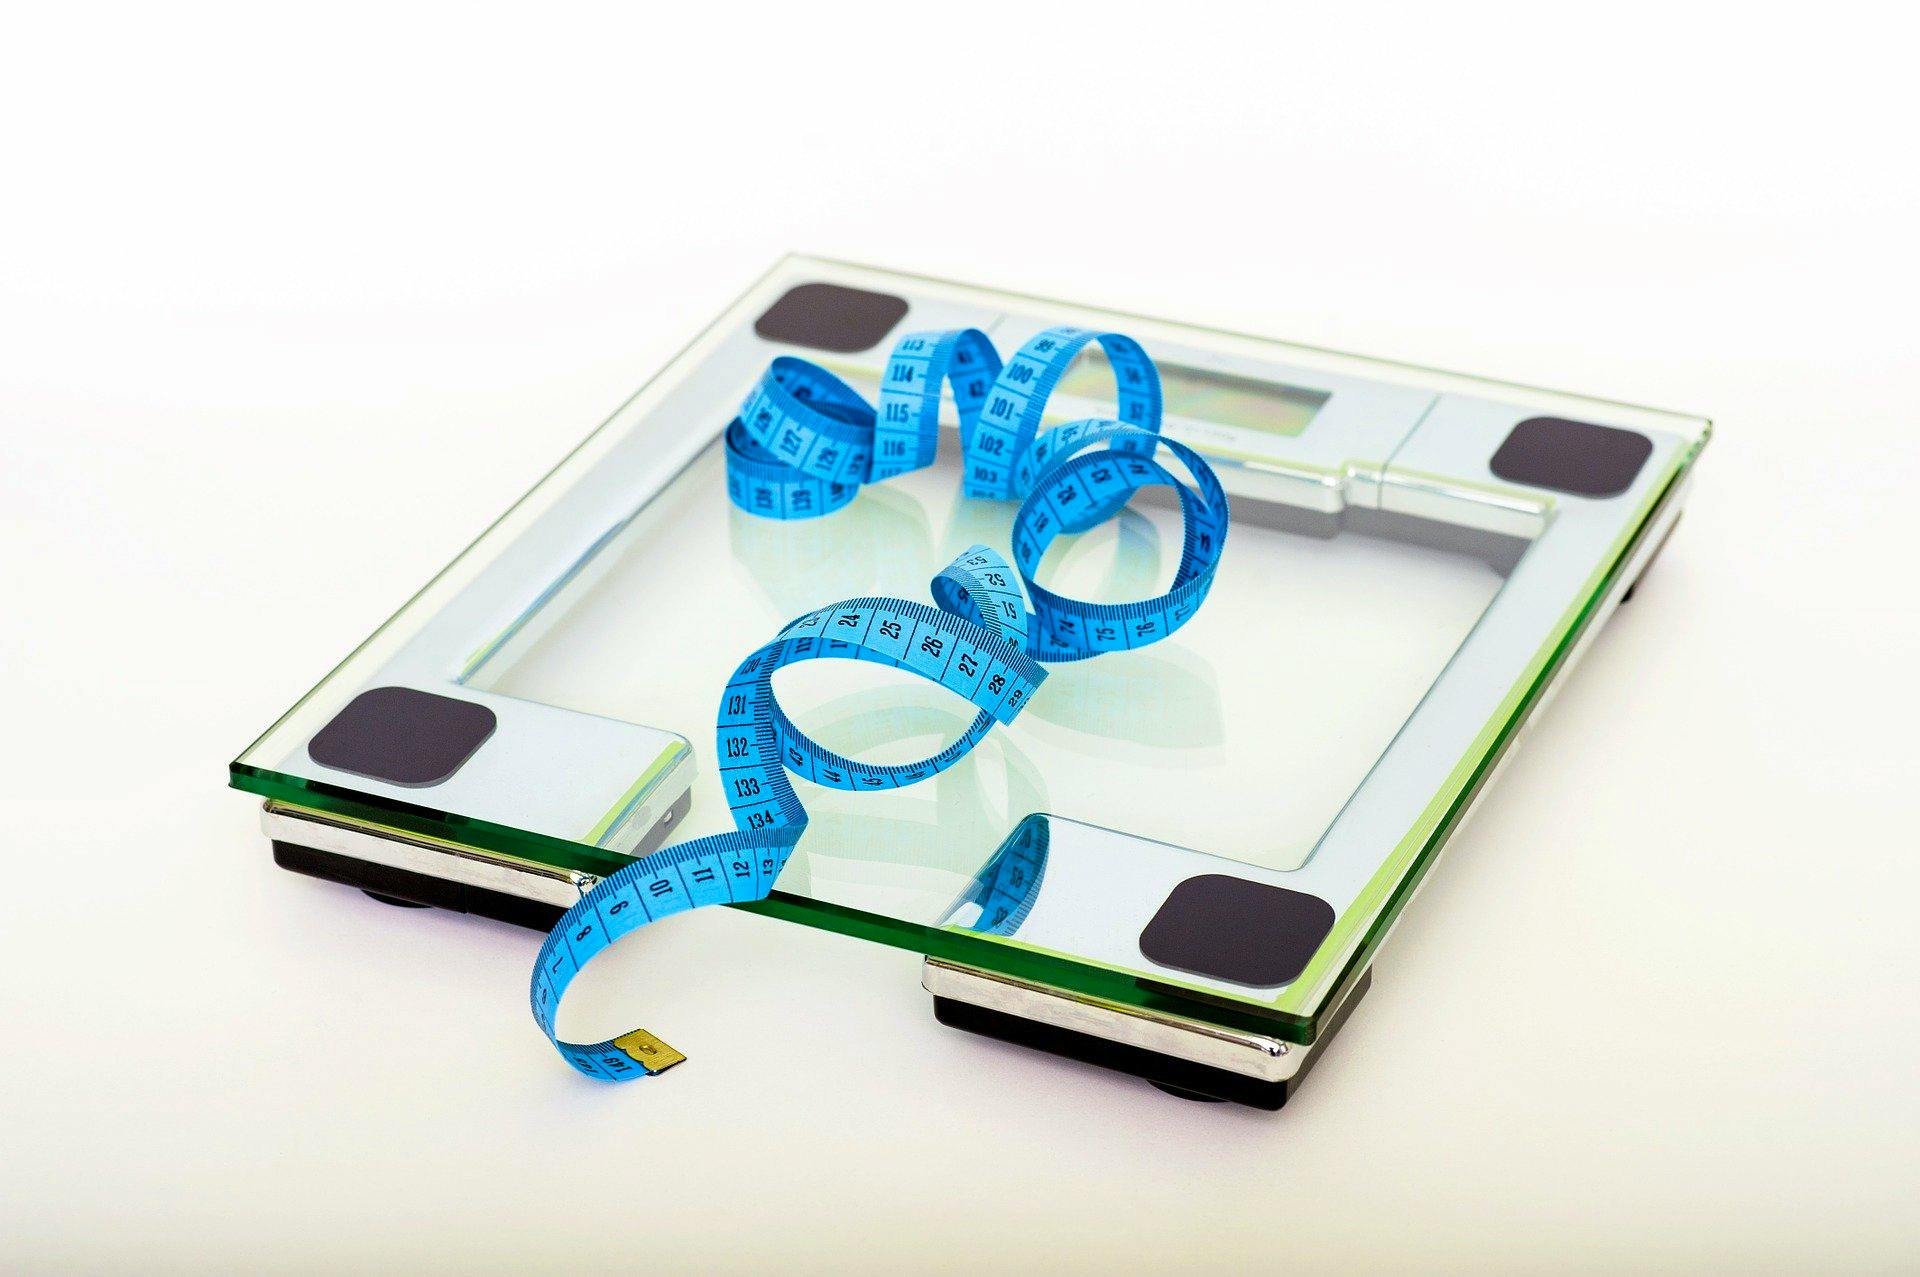 Step off the scales and keep your mental health in balance